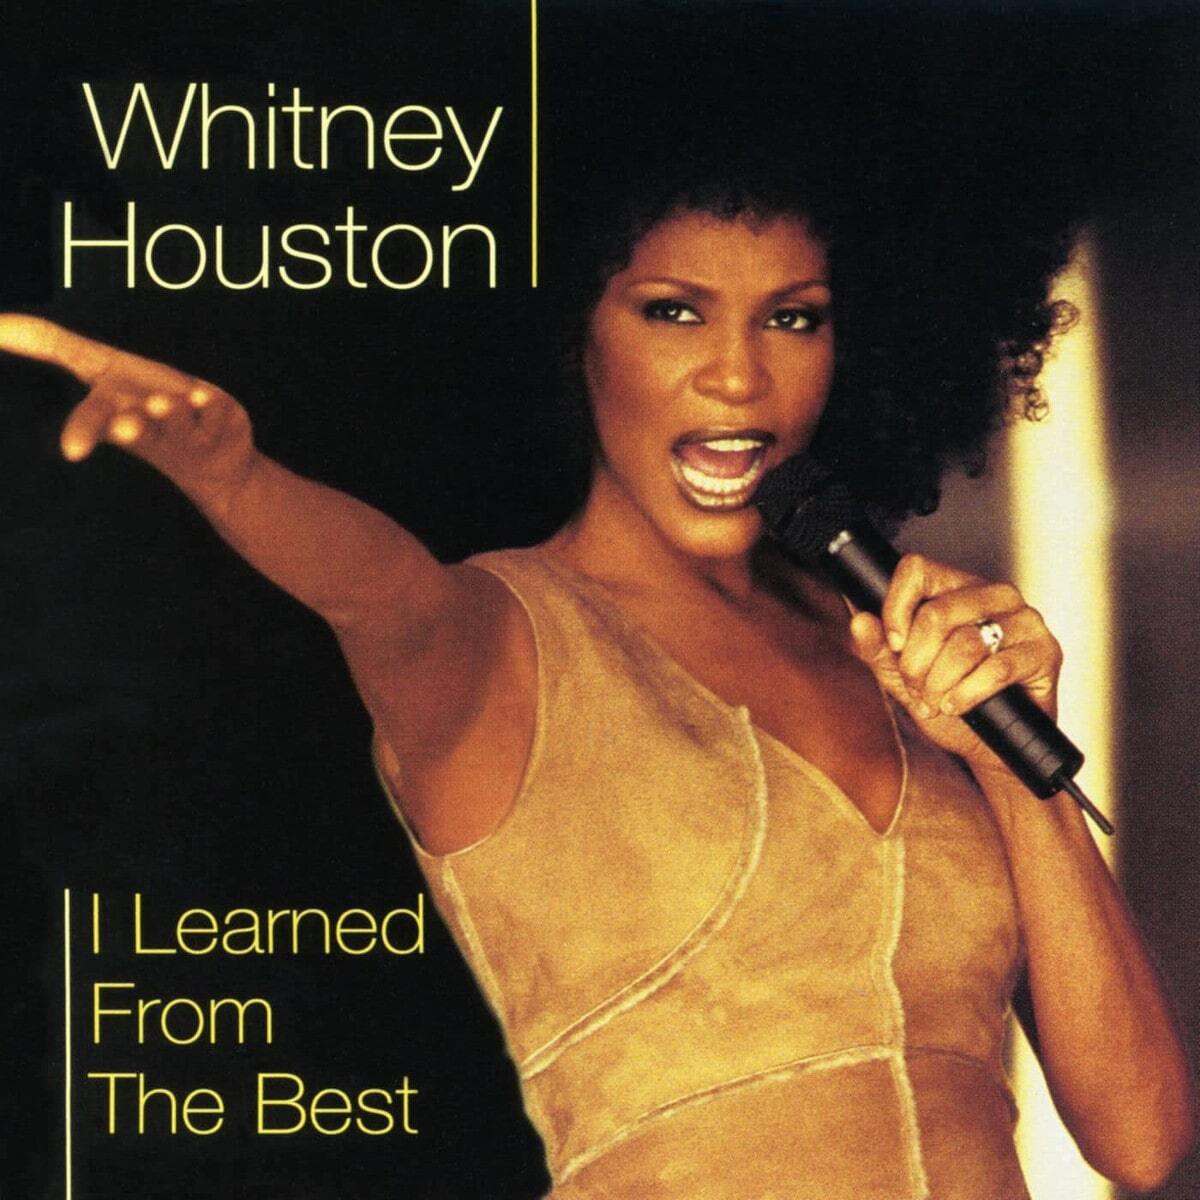 <p>Whitney’s first official single to be released in the 21st century, <a href="https://www.youtube.com/watch?v=YFVnVuTcz9I">“I Learned from the Best”</a> is a low-key track that lets Whitney’s gorgeous vocals take centre stage. <a href="https://genius.com/Whitney-houston-i-learned-from-the-best-lyrics">Written</a> by her frequent collaborator Diane Warren, the track is a quintessential Whitney ballad, which could never be a bad thing.</p>